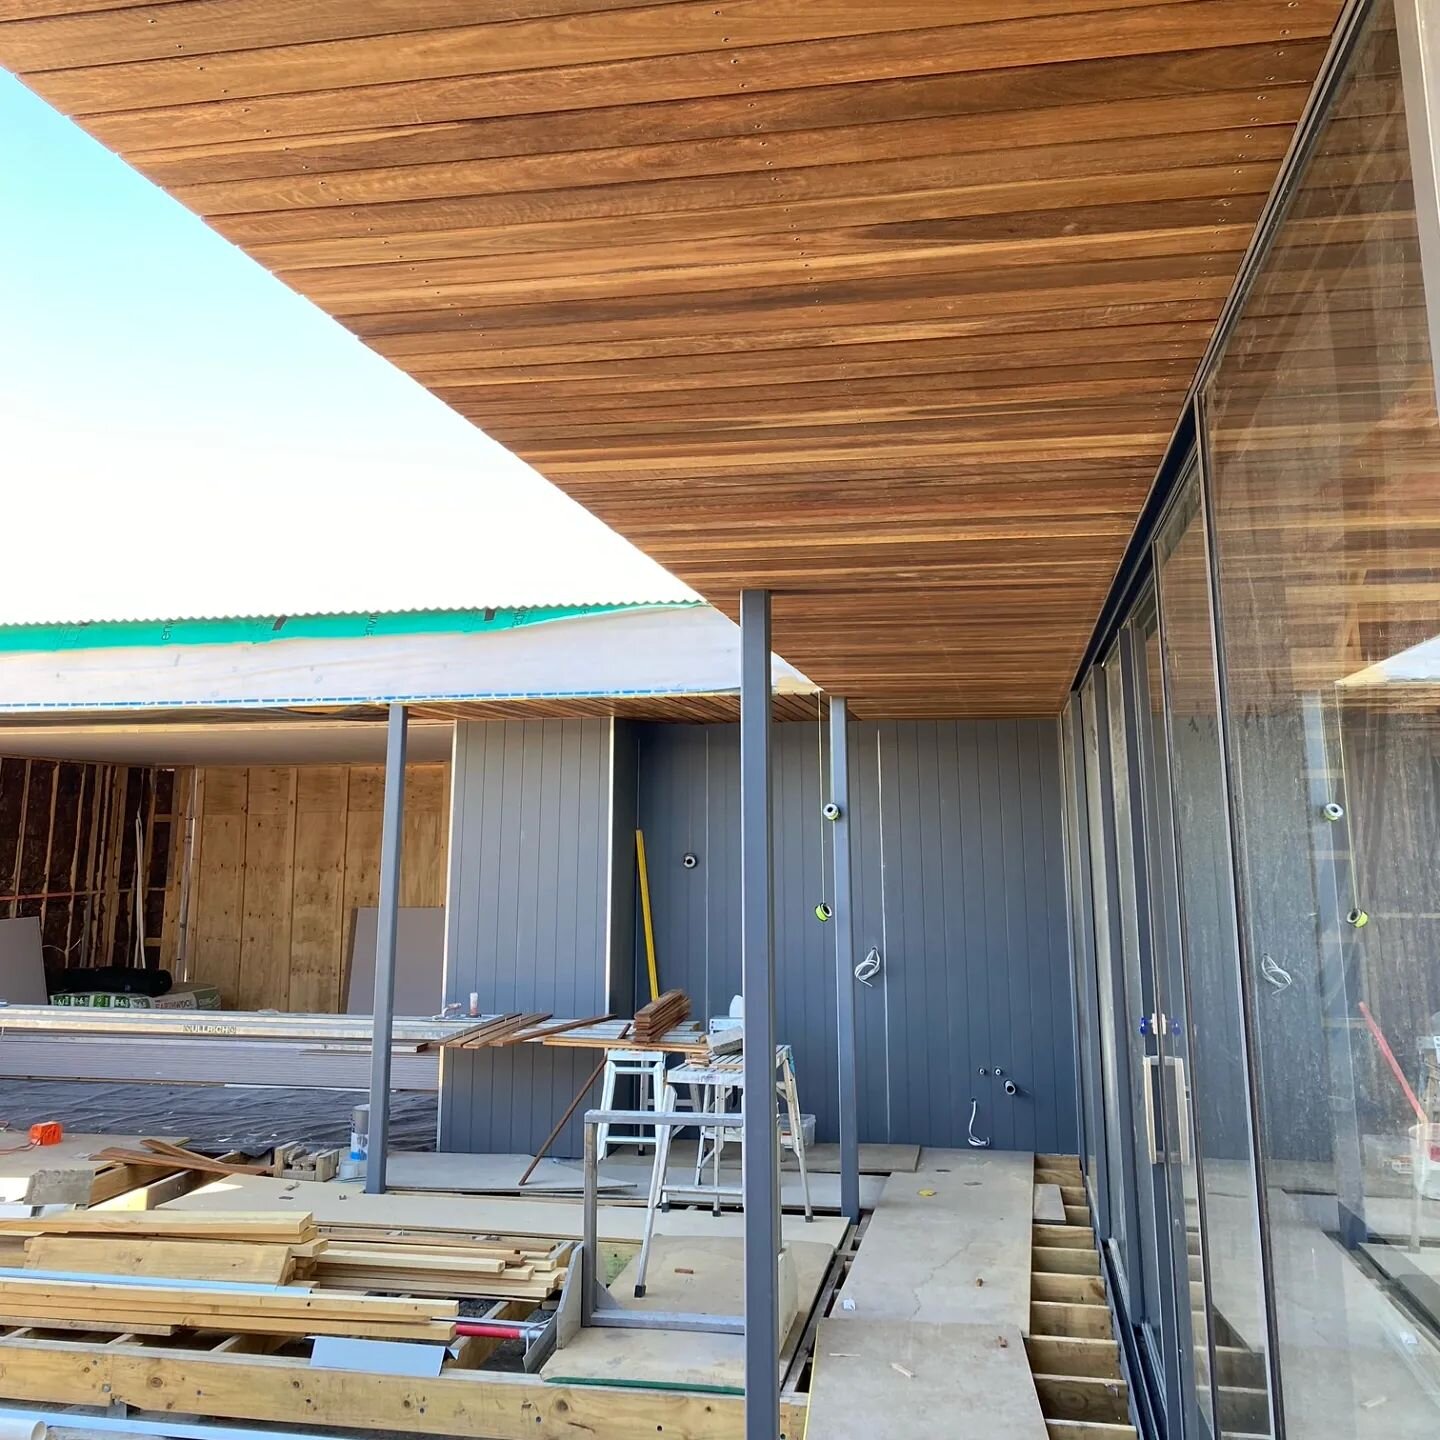 Let's start the week with a construction update! Sandford project is taking shape with a lot happening externally. This beautiful Merbau cladding has just started going up on the eaves. Located where the entry will be to the home as well as a courtya